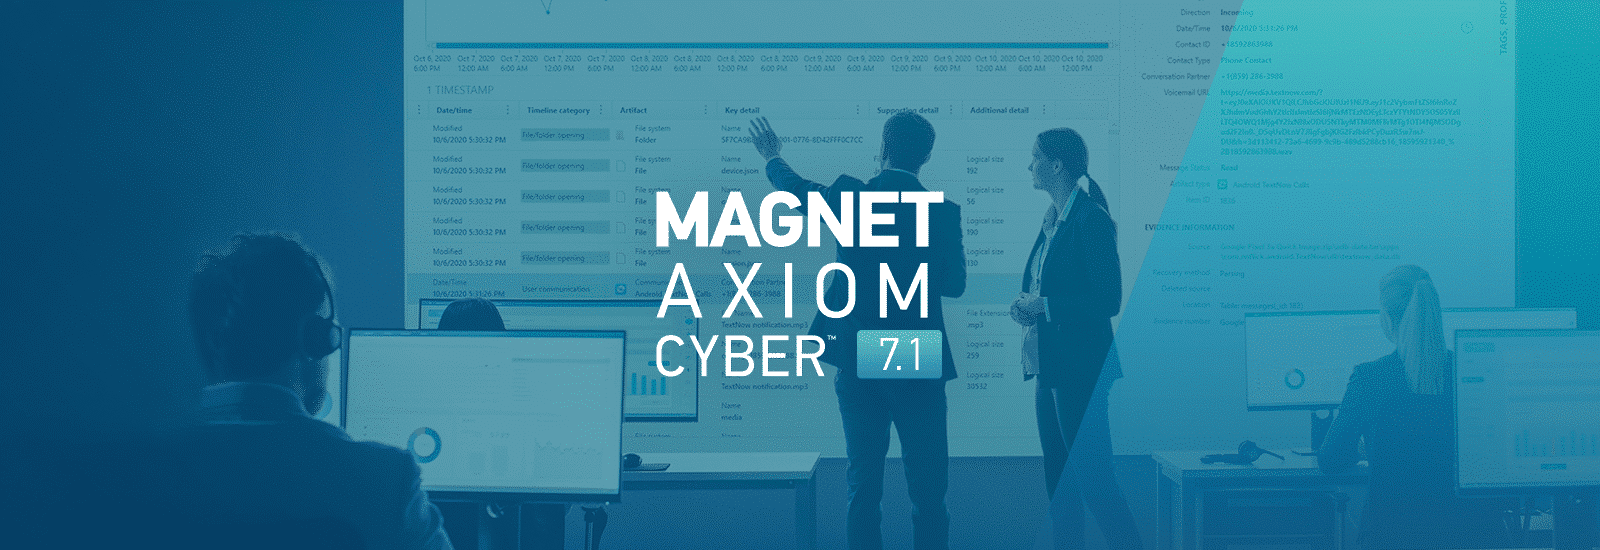 A decorative header for the Magnet AXIOM Cyber 7.1 release